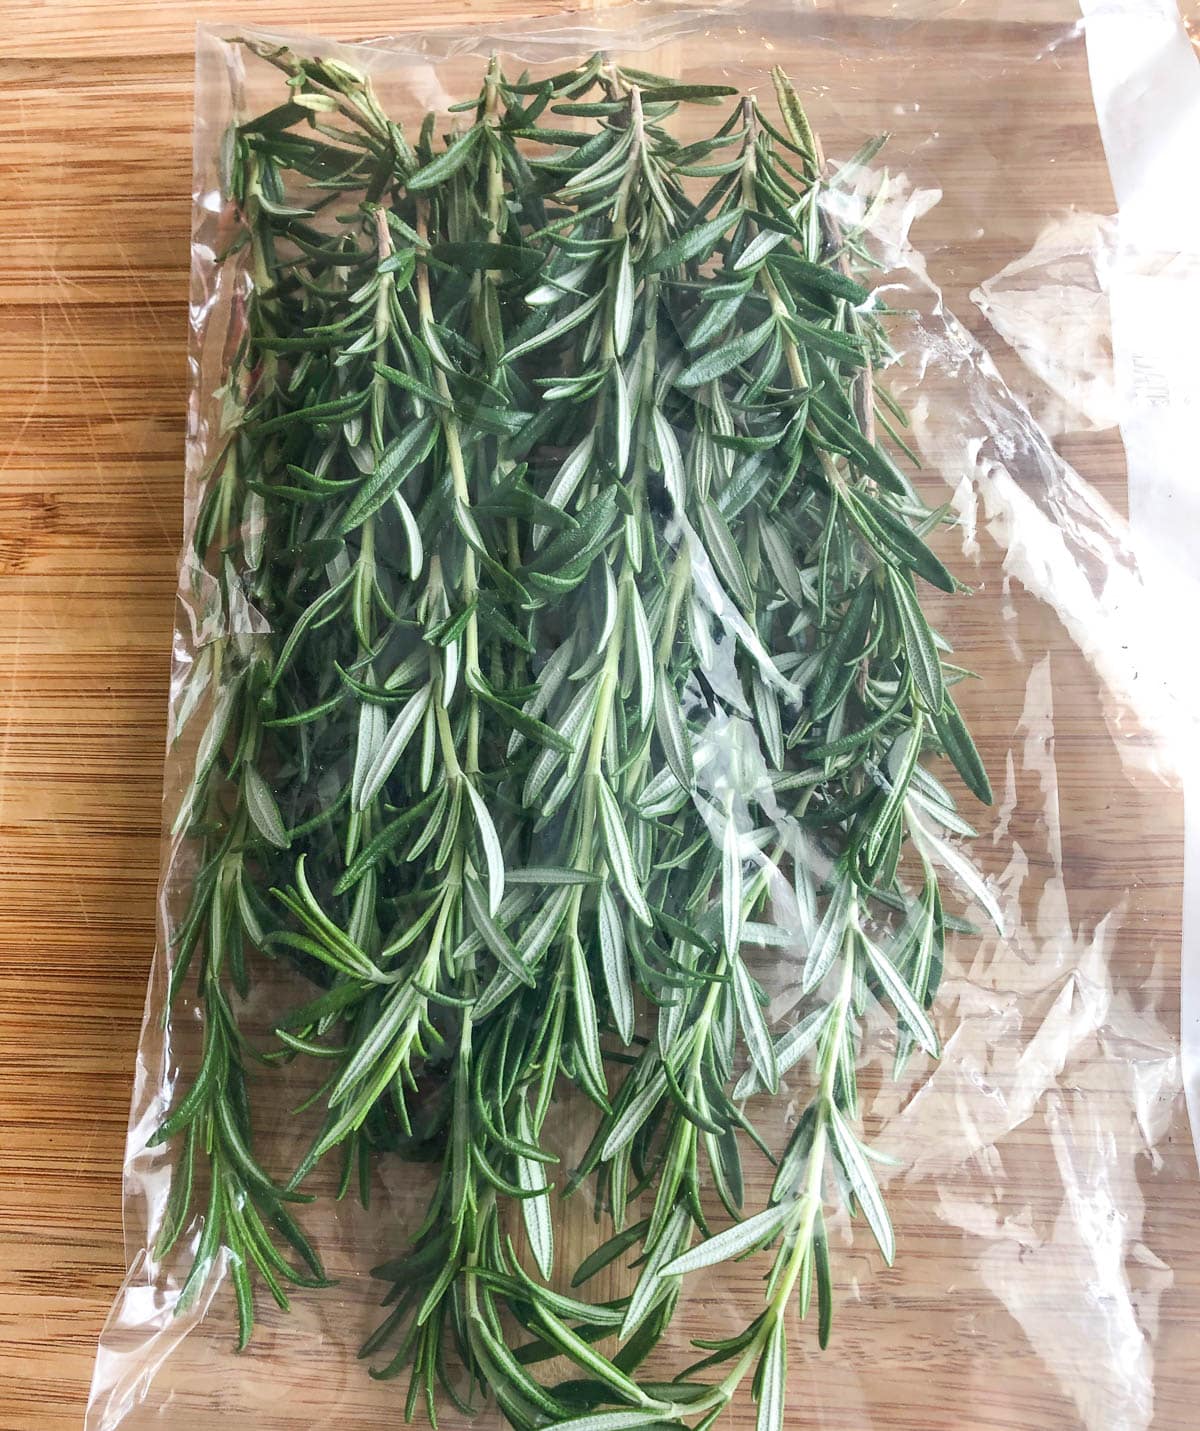 what is Rosemary